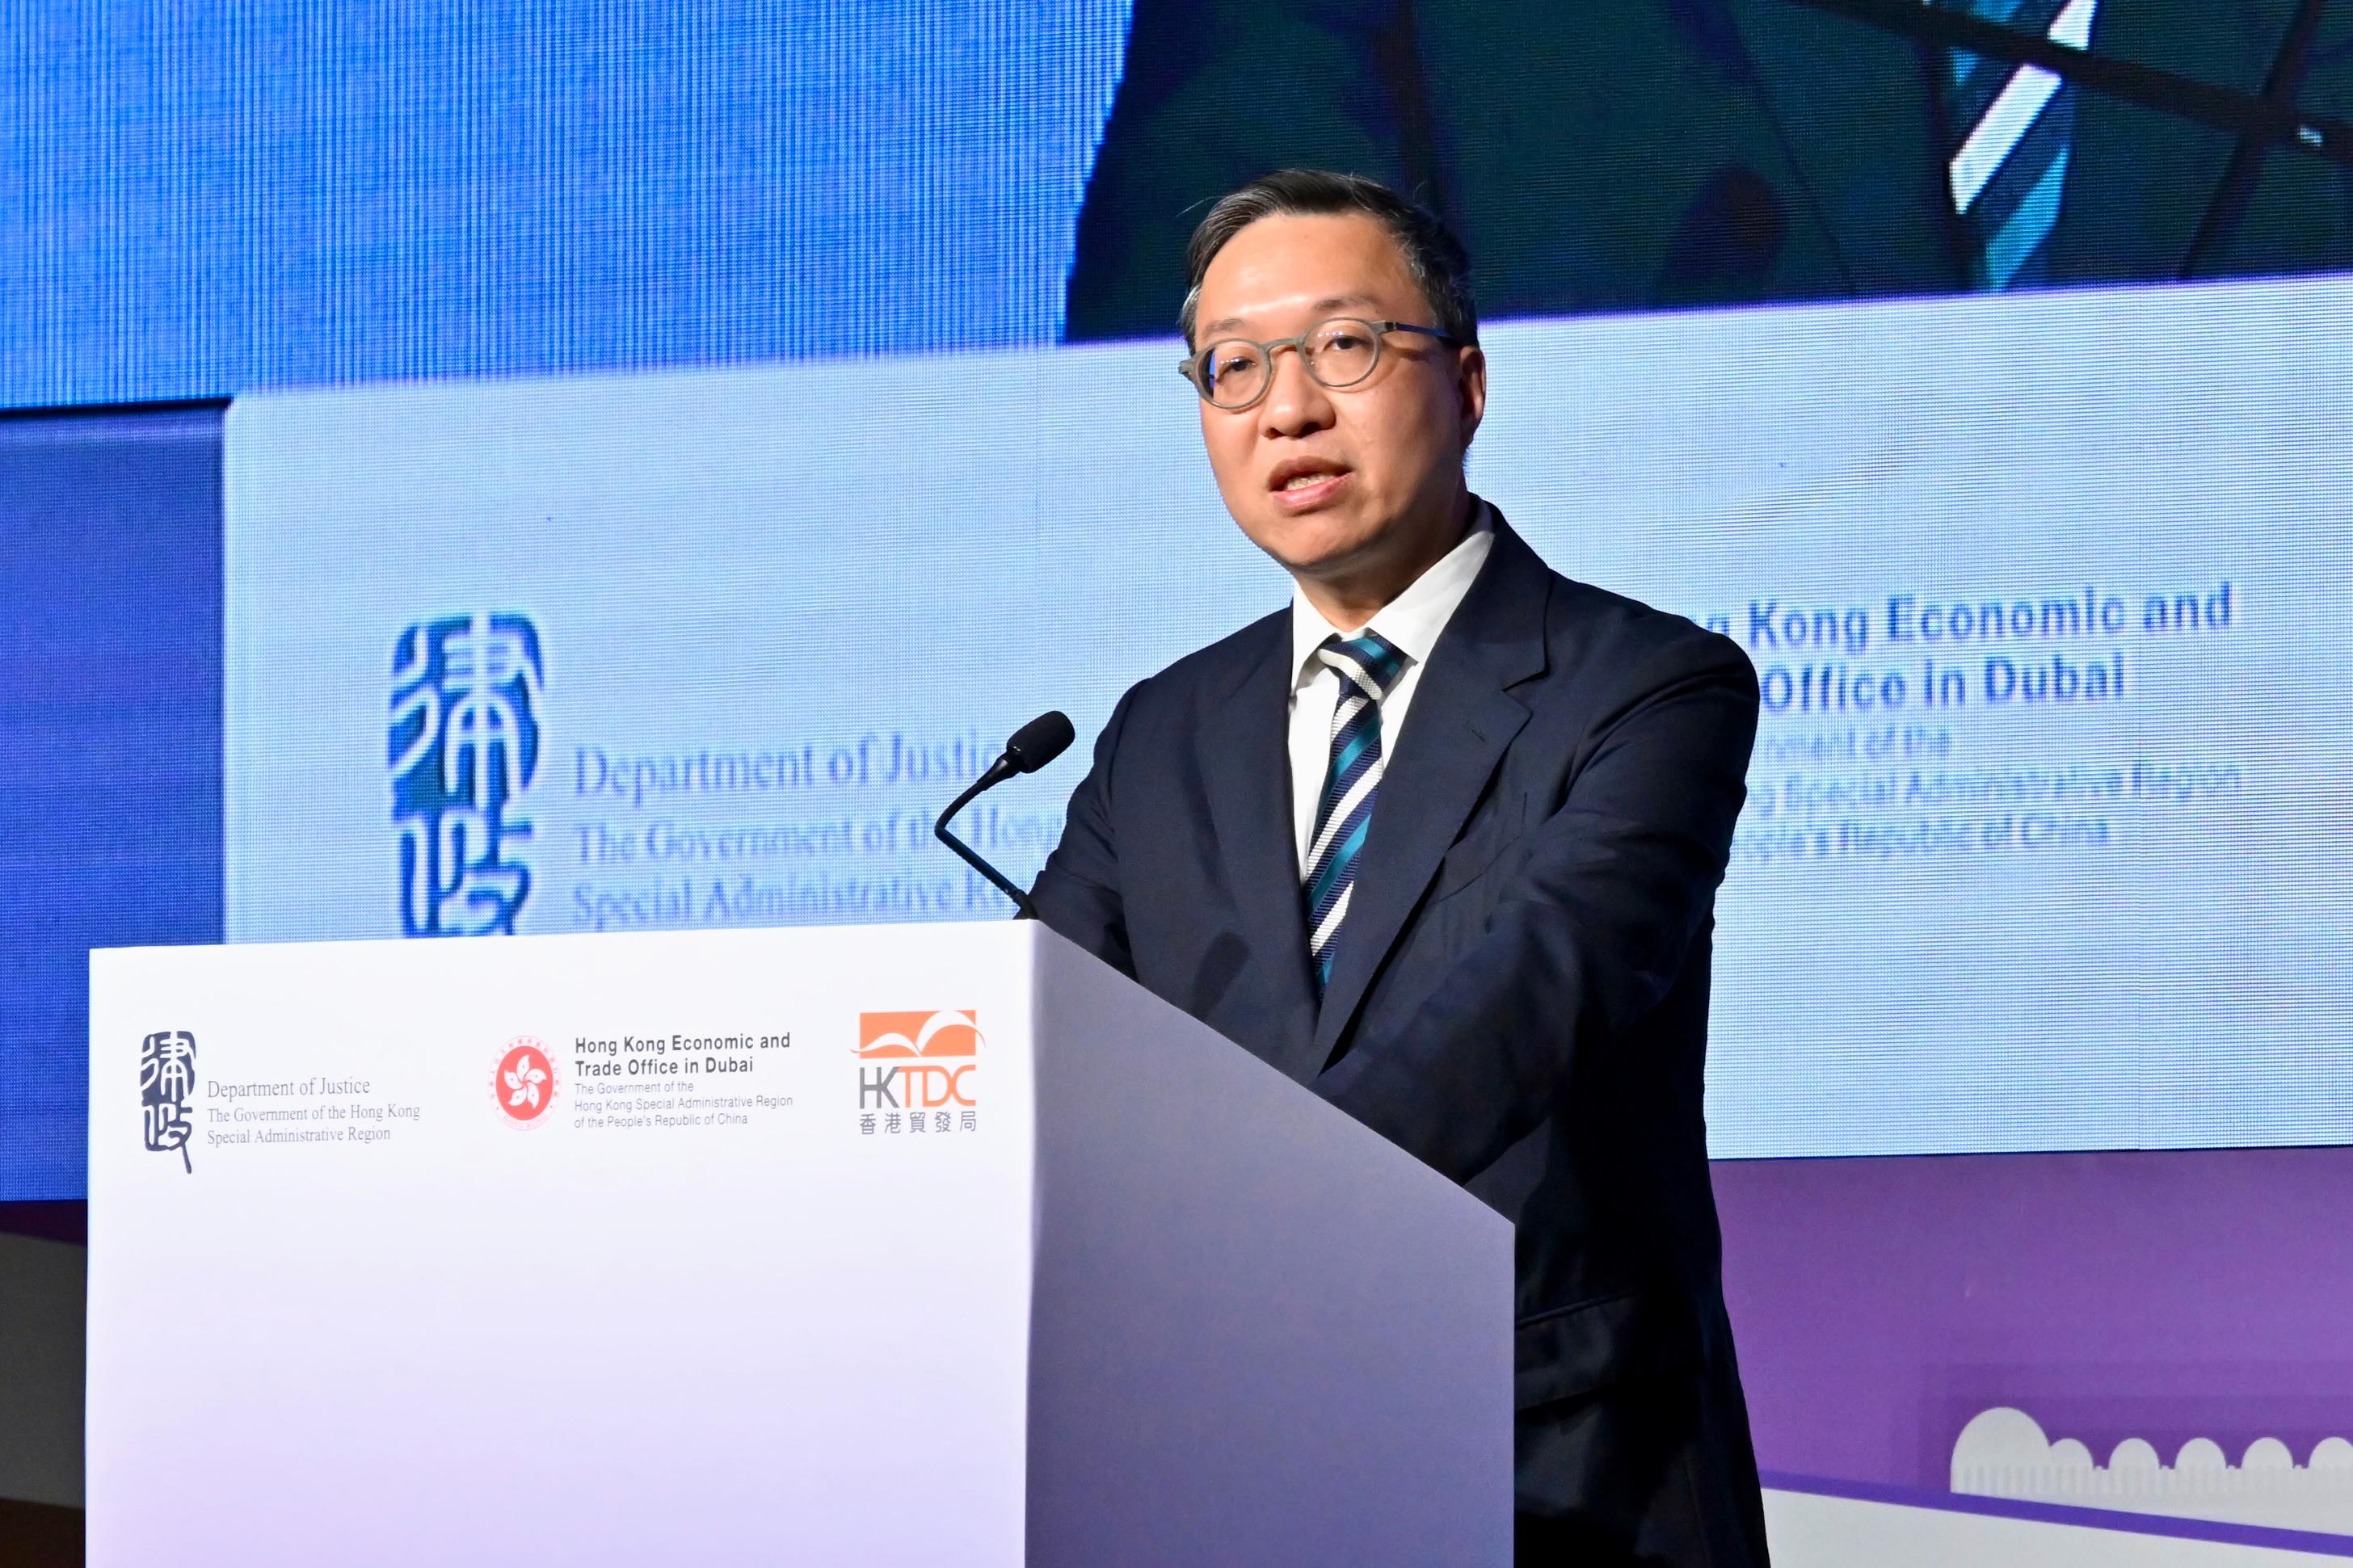 The Secretary for Justice, Mr Paul Lam, SC, continued his visit to Dubai, the United Arab Emirates (UAE), today (May 22, Dubai time) to attend a forum titled Hong Kong - The Common Law Gateway for UAE Businesses to China and Beyond for promoting Hong Kong's legal and dispute resolution services. Photo shows Mr Lam delivering his opening remarks at the forum.
